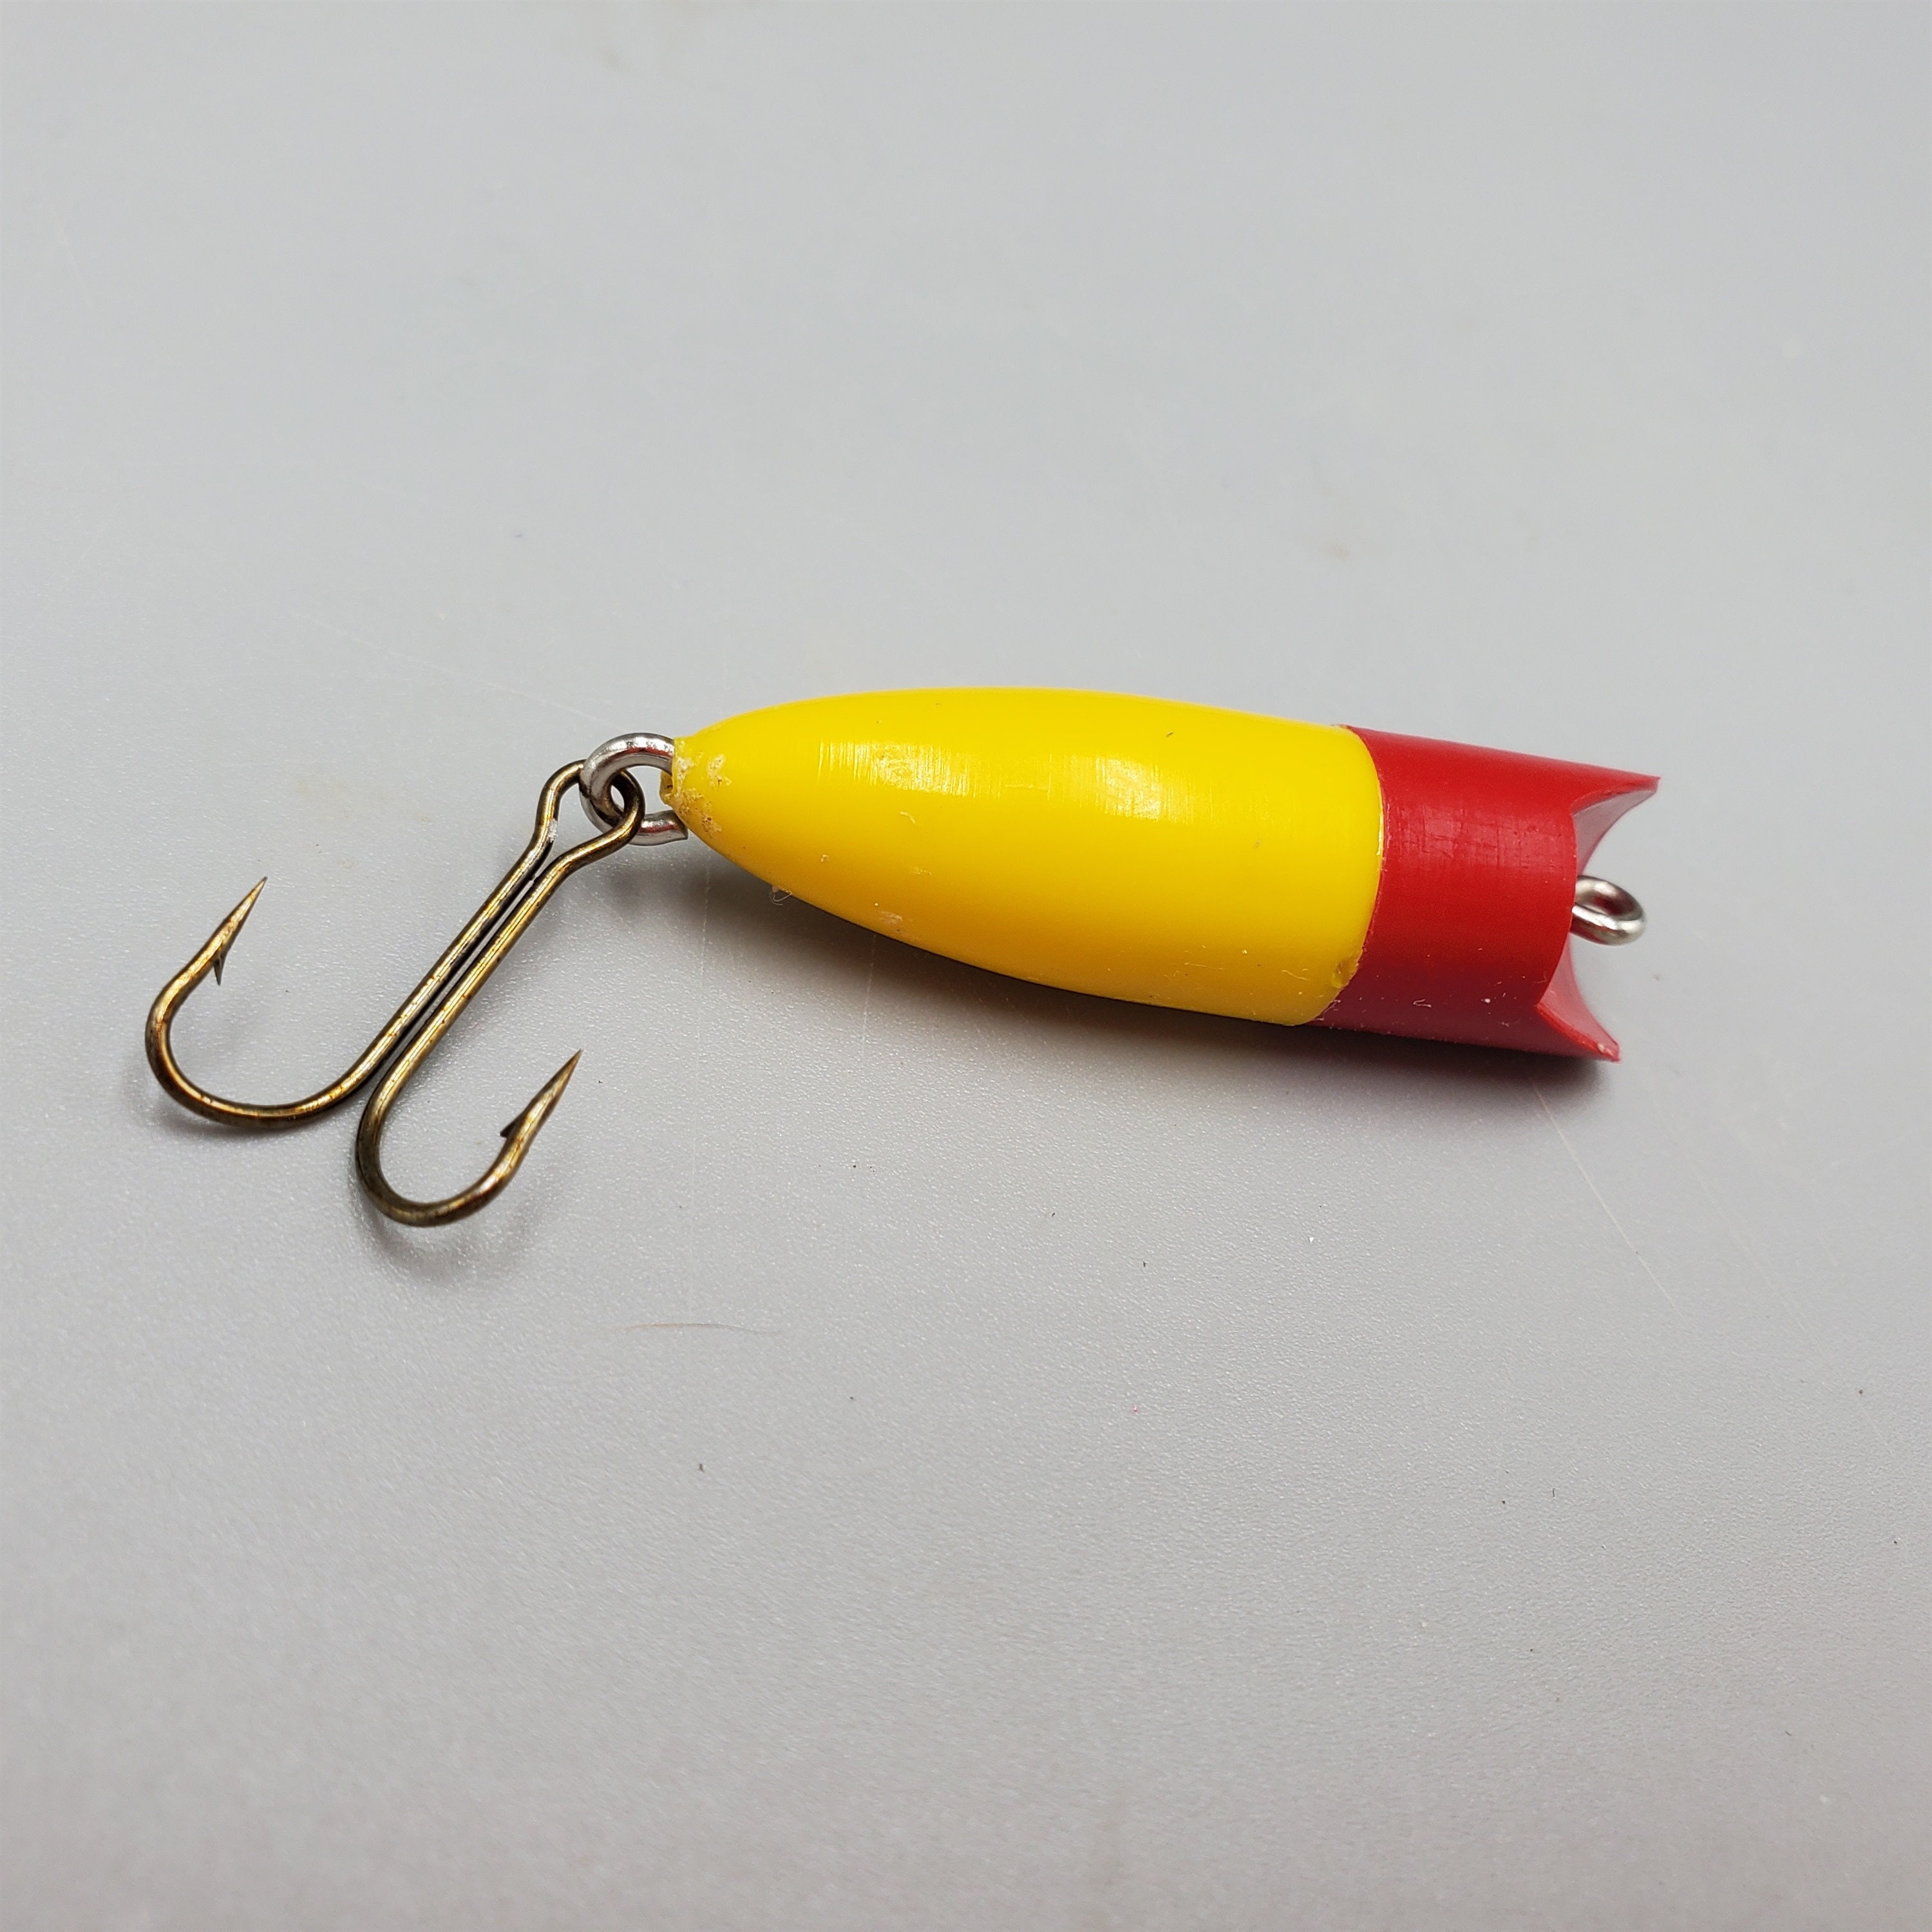 Buy Vintage Fishing Lure Red Yellow Bullet Shape Online in India 